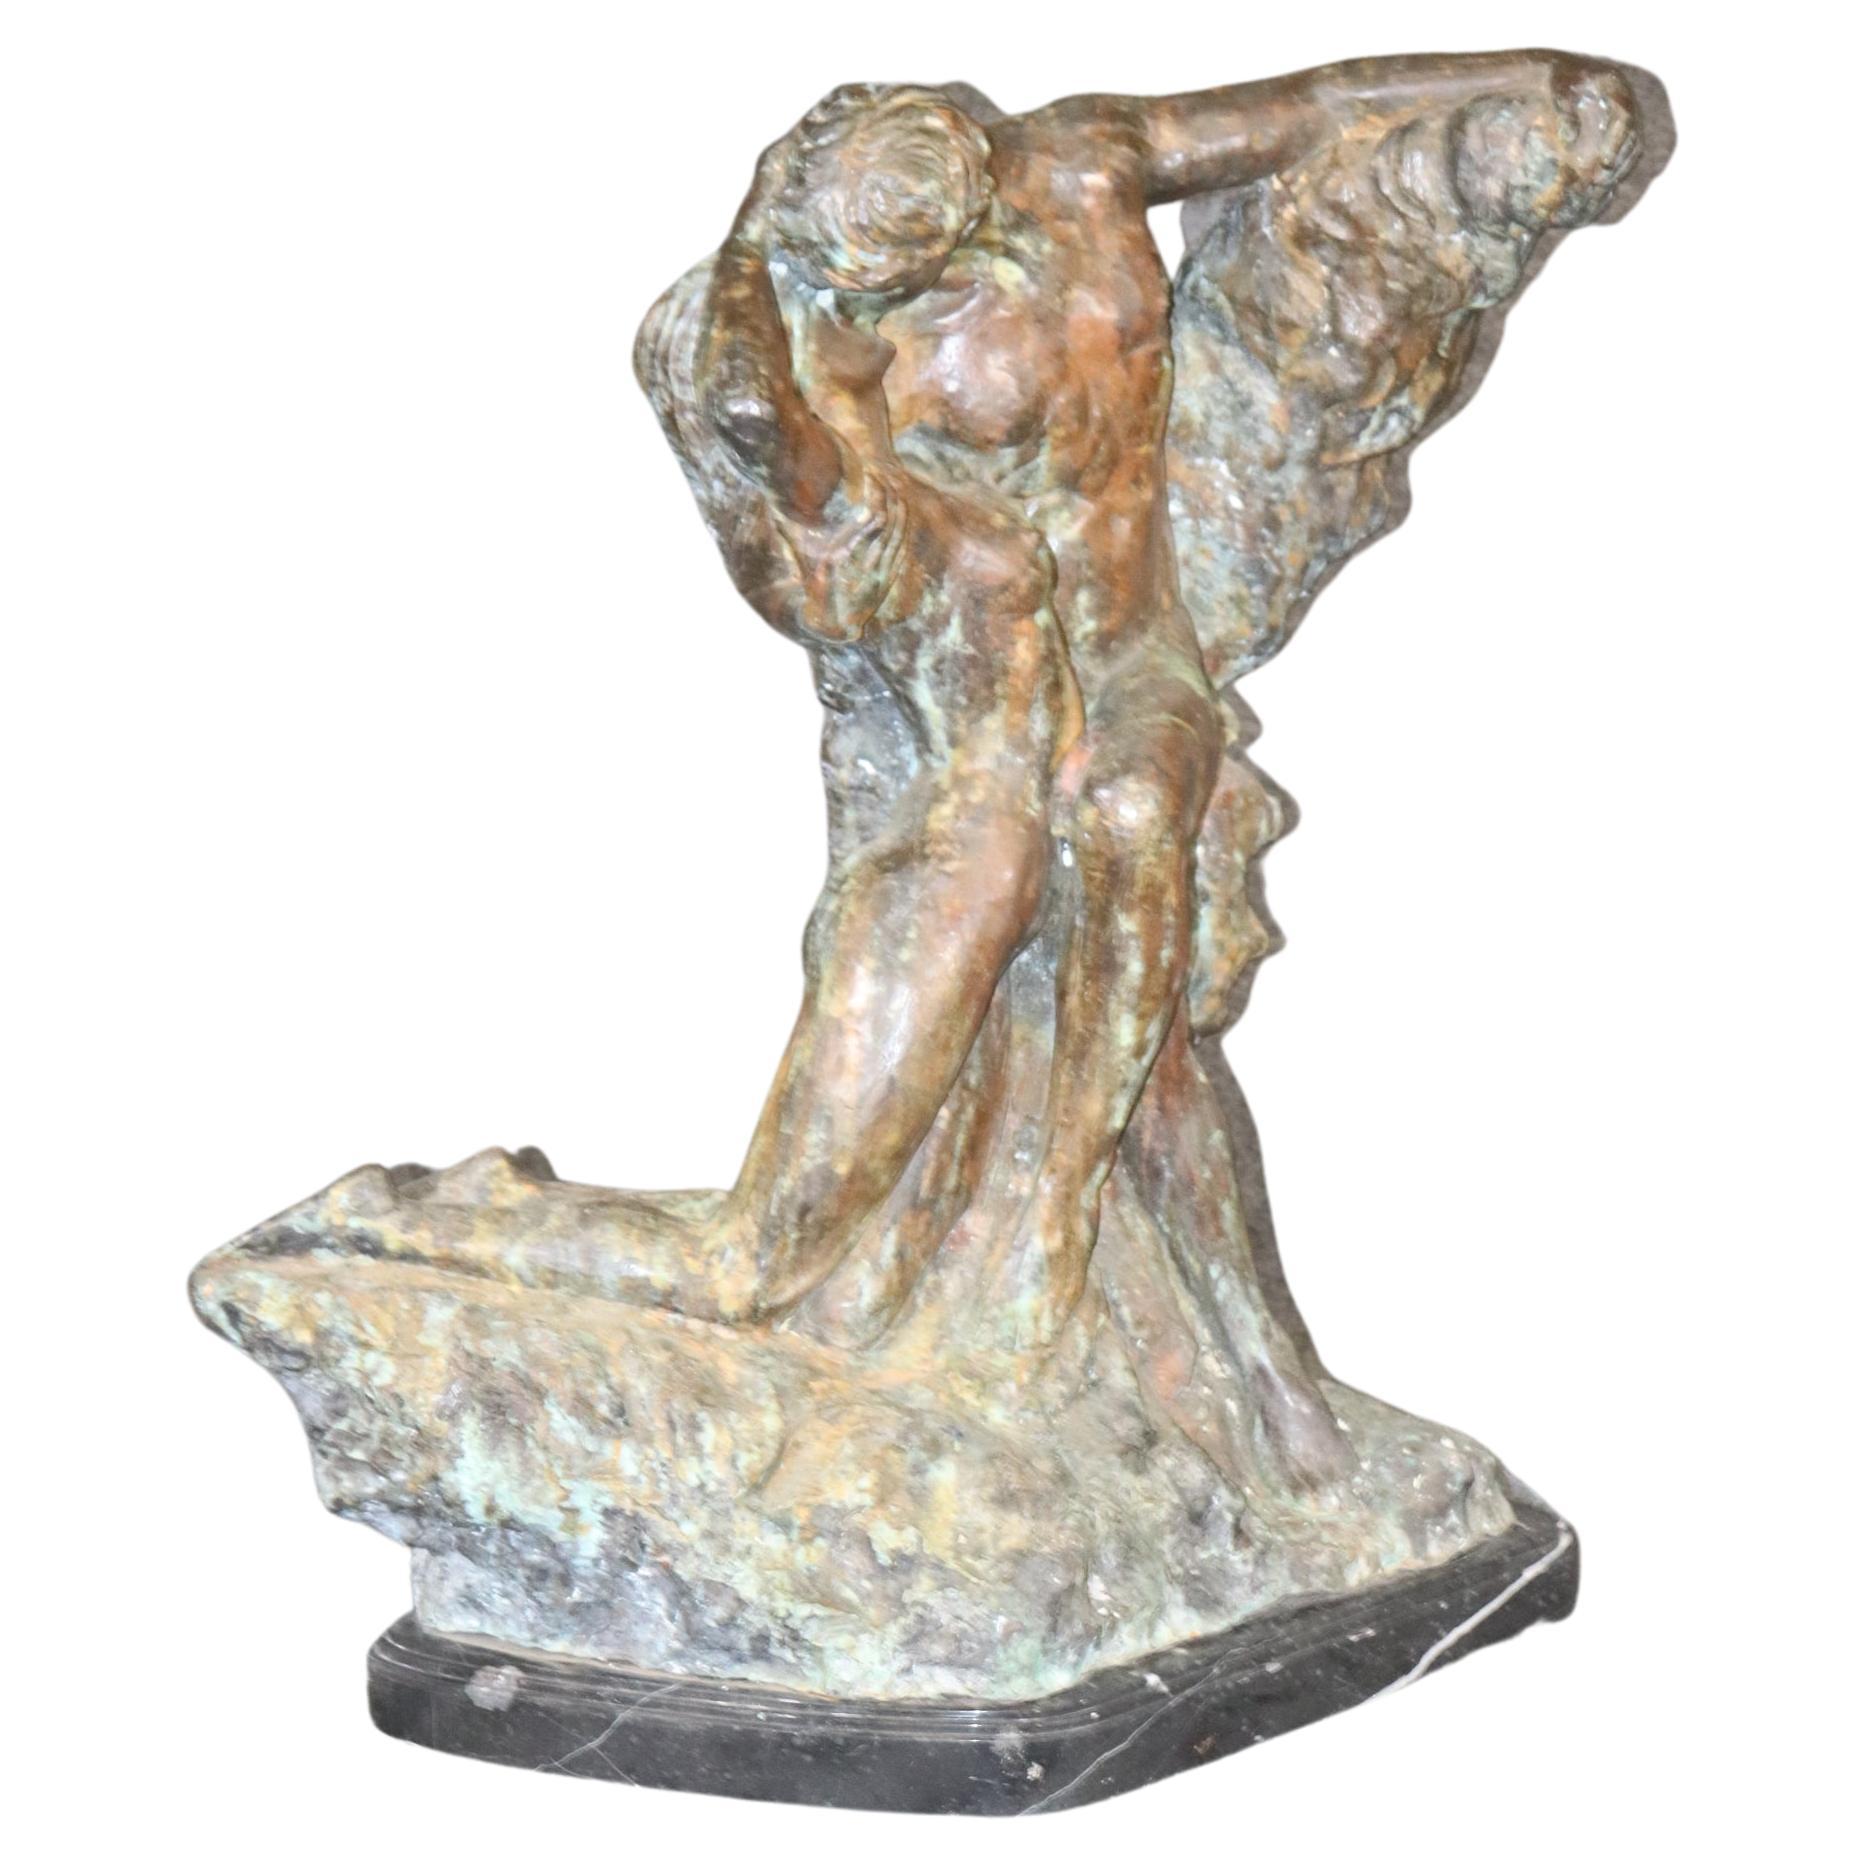 What is the name of the famous bronze sculpture of a man created by Auguste Rodin?